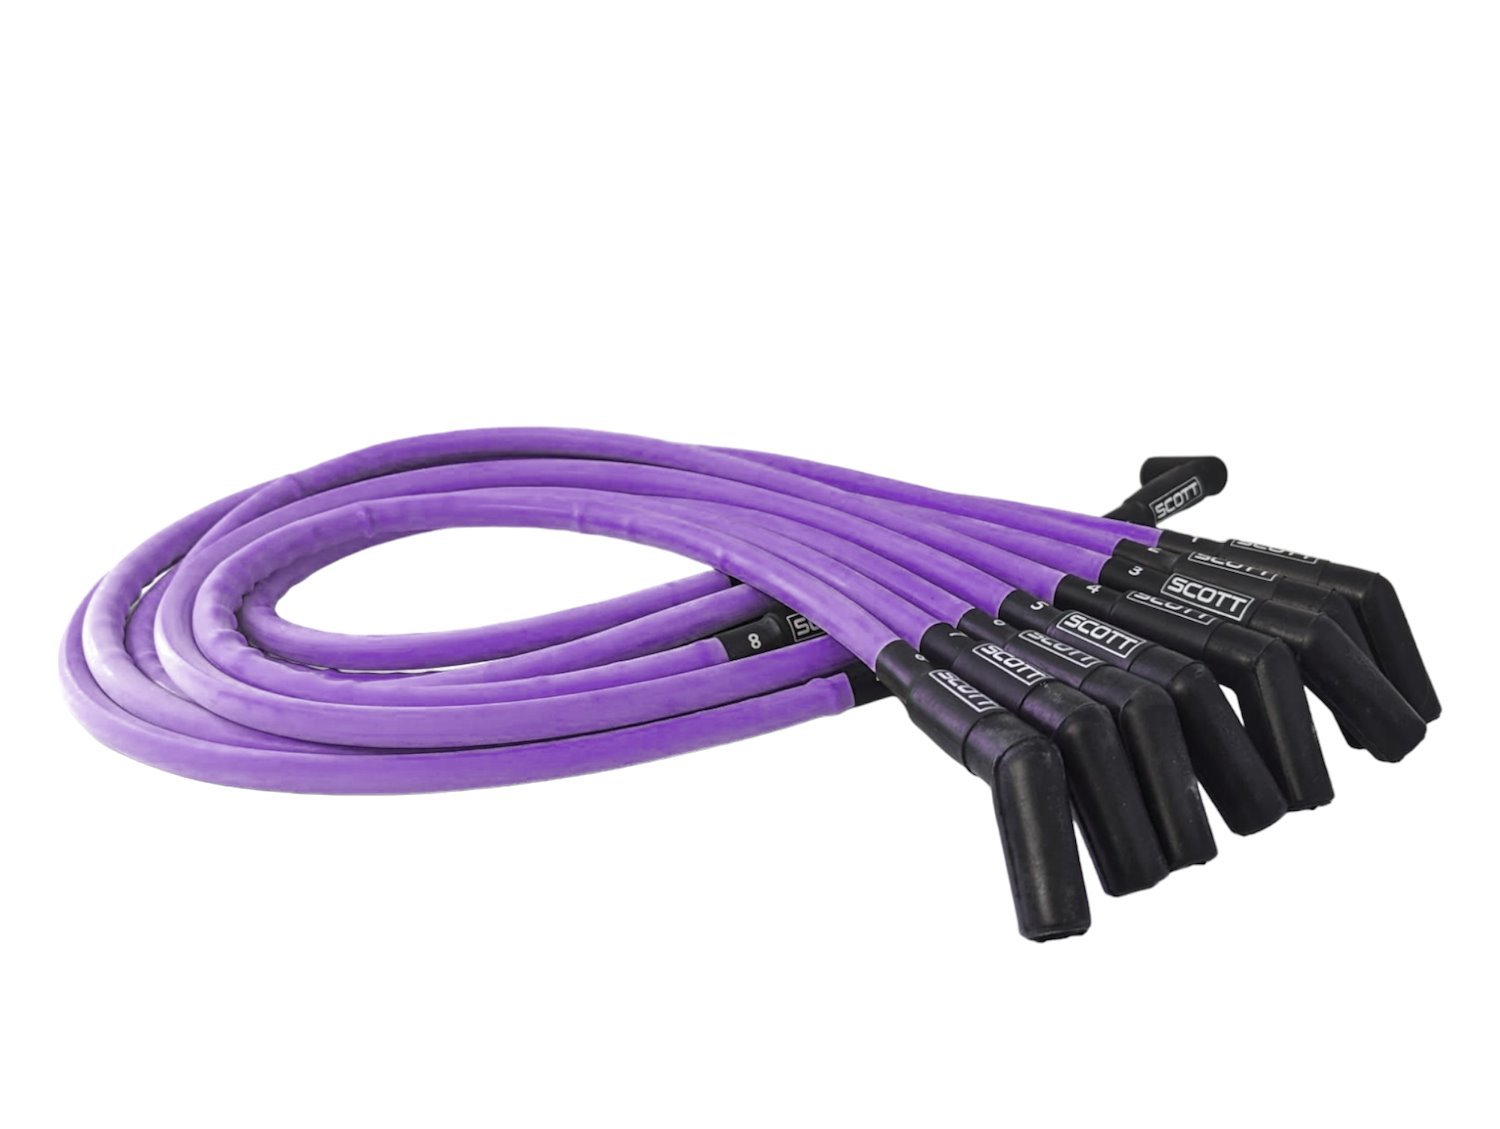 SPW300-CH-415-6 Super Mag Fiberglass-Oversleeved Spark Plug Wire Set for Big Block Chevy, Over Valve Cover [Purple]